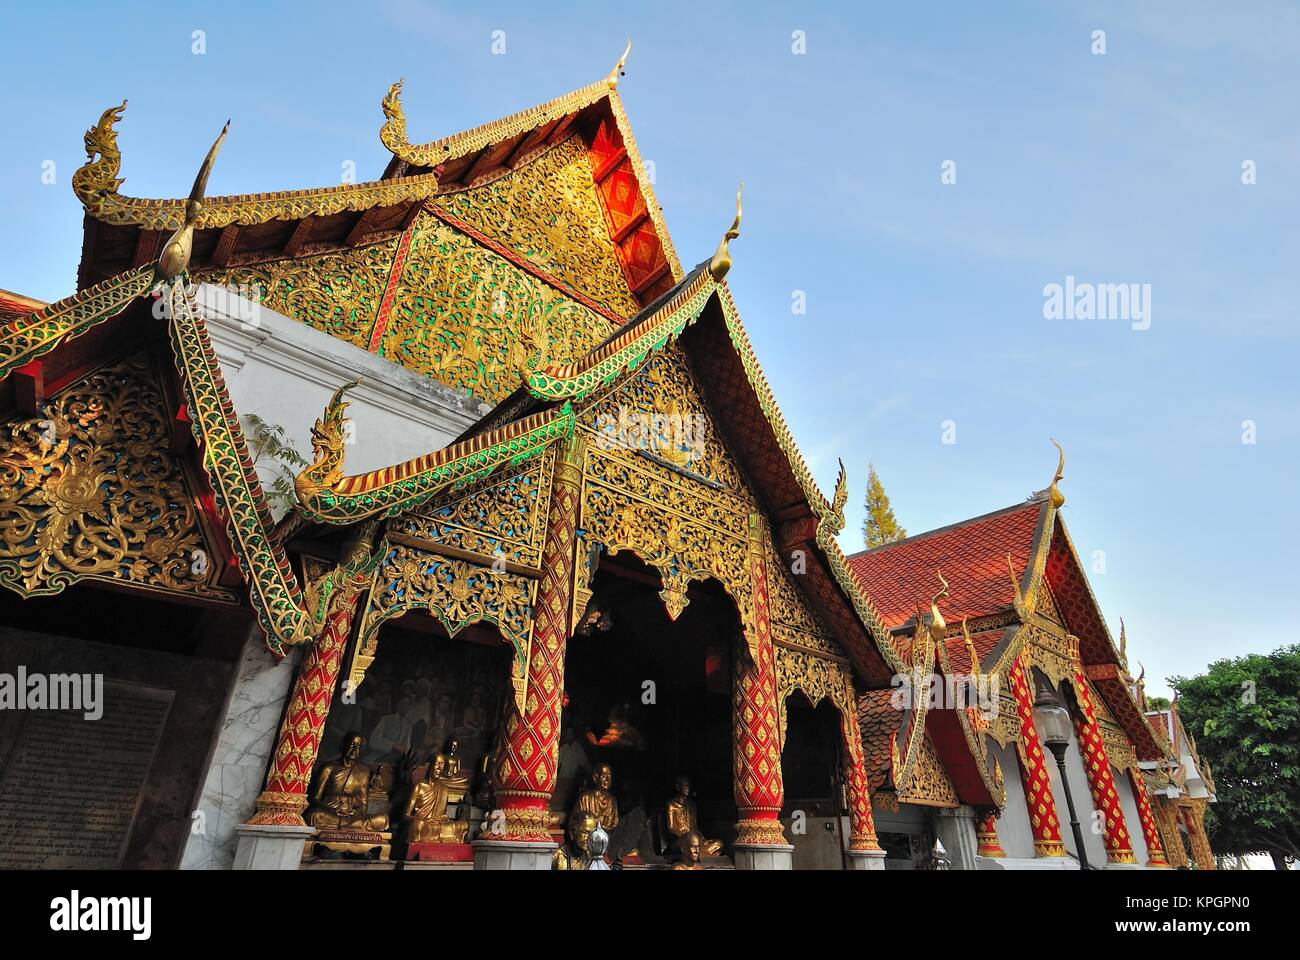 Majestic religious monument with typical Southeast Asian architectural ...